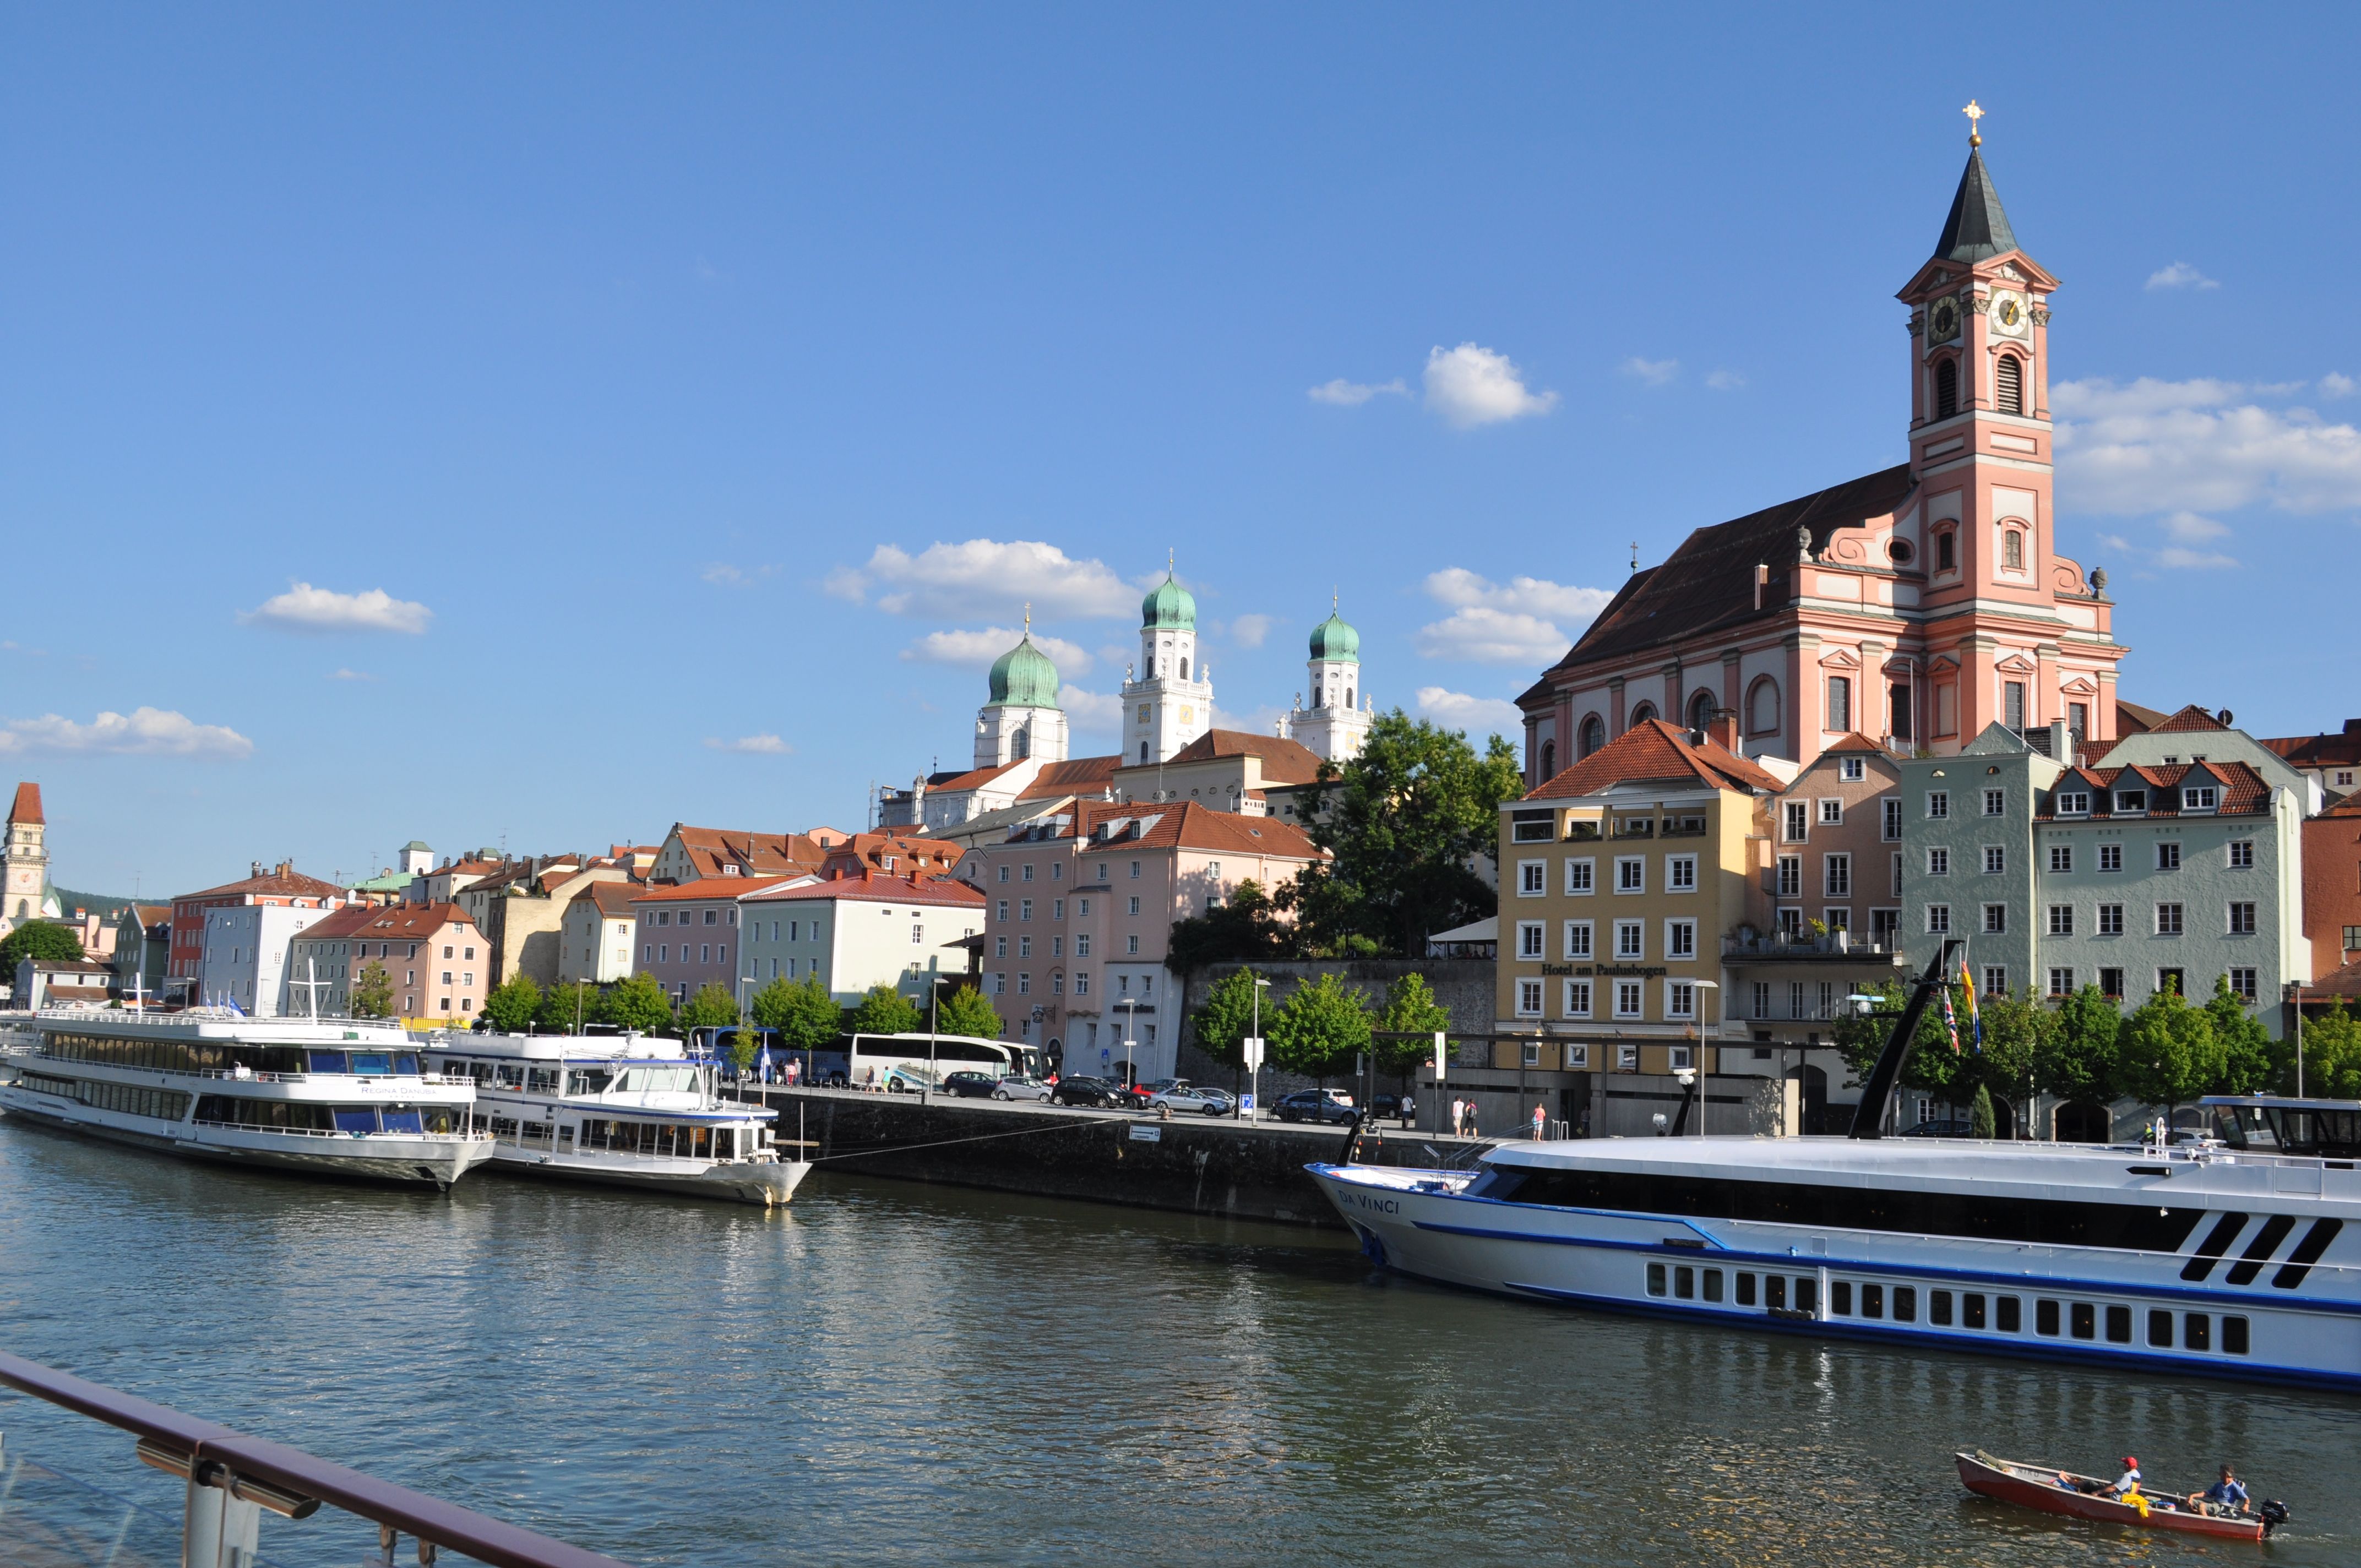 Picturesque Passau receives the largest chunks of tourists from river cruises.